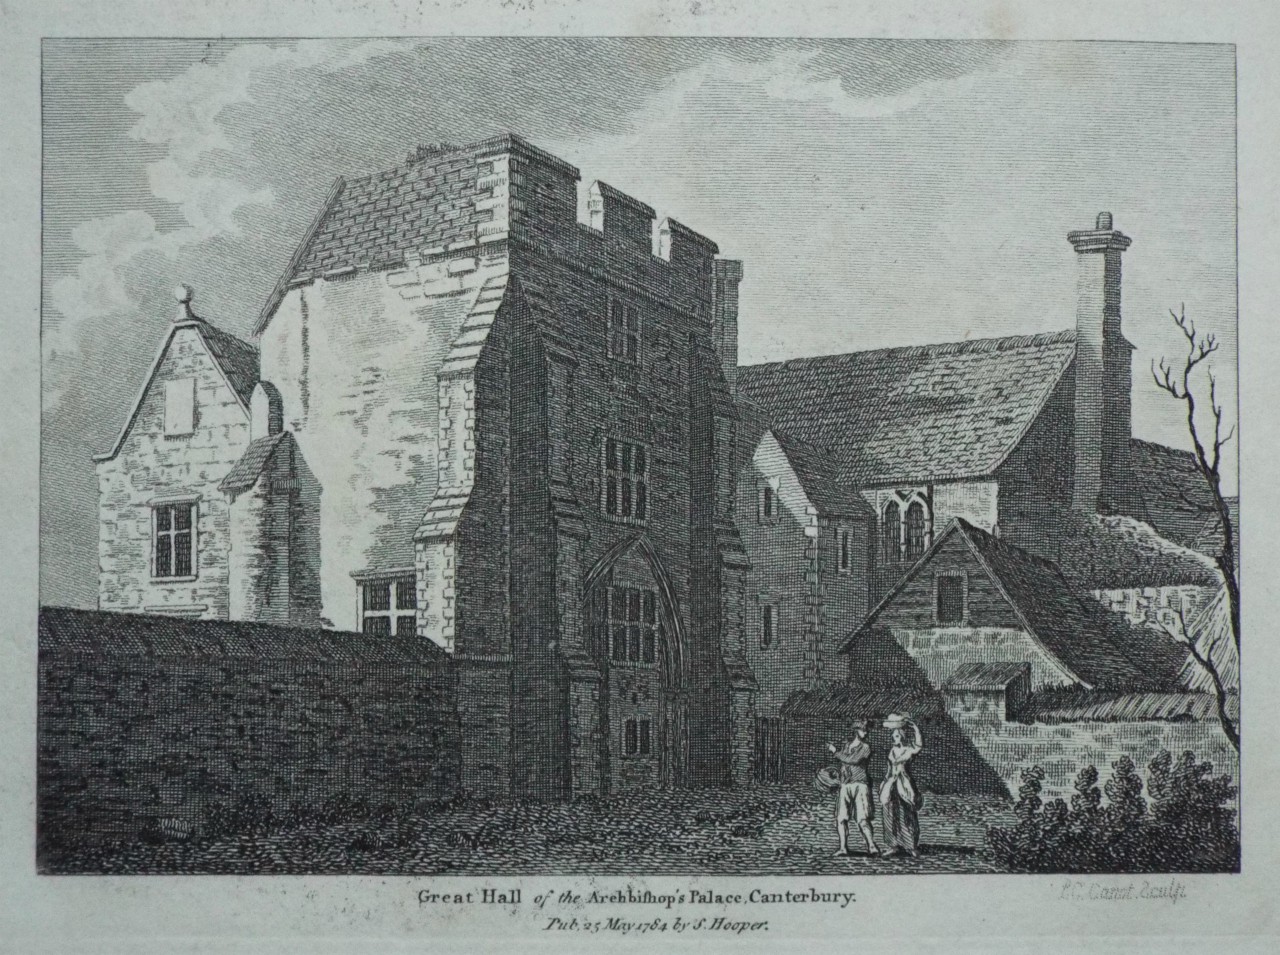 Print - Great Hall of the Archbishop's Palace, Canterbury. - Canot